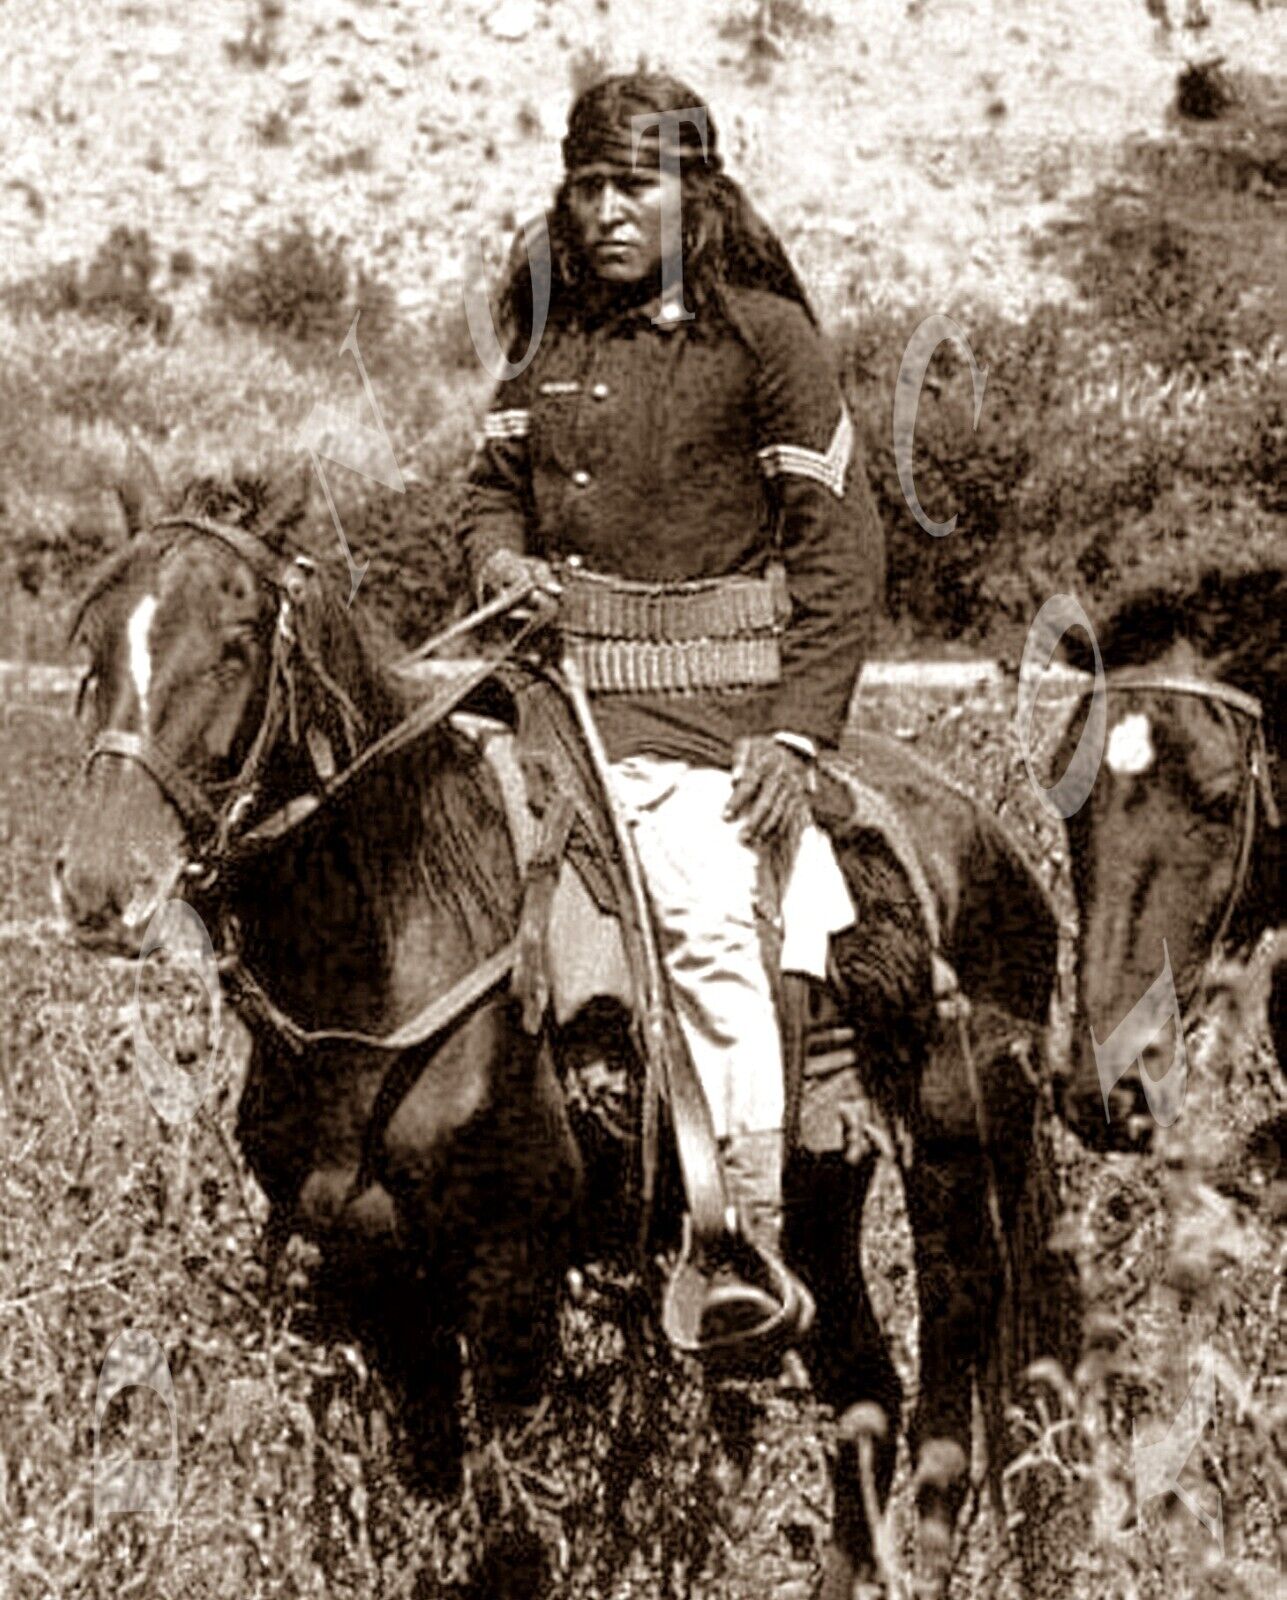 Antique Reproduction 8X10 Photograph Print of Apache Indian Sergeant of Scouts